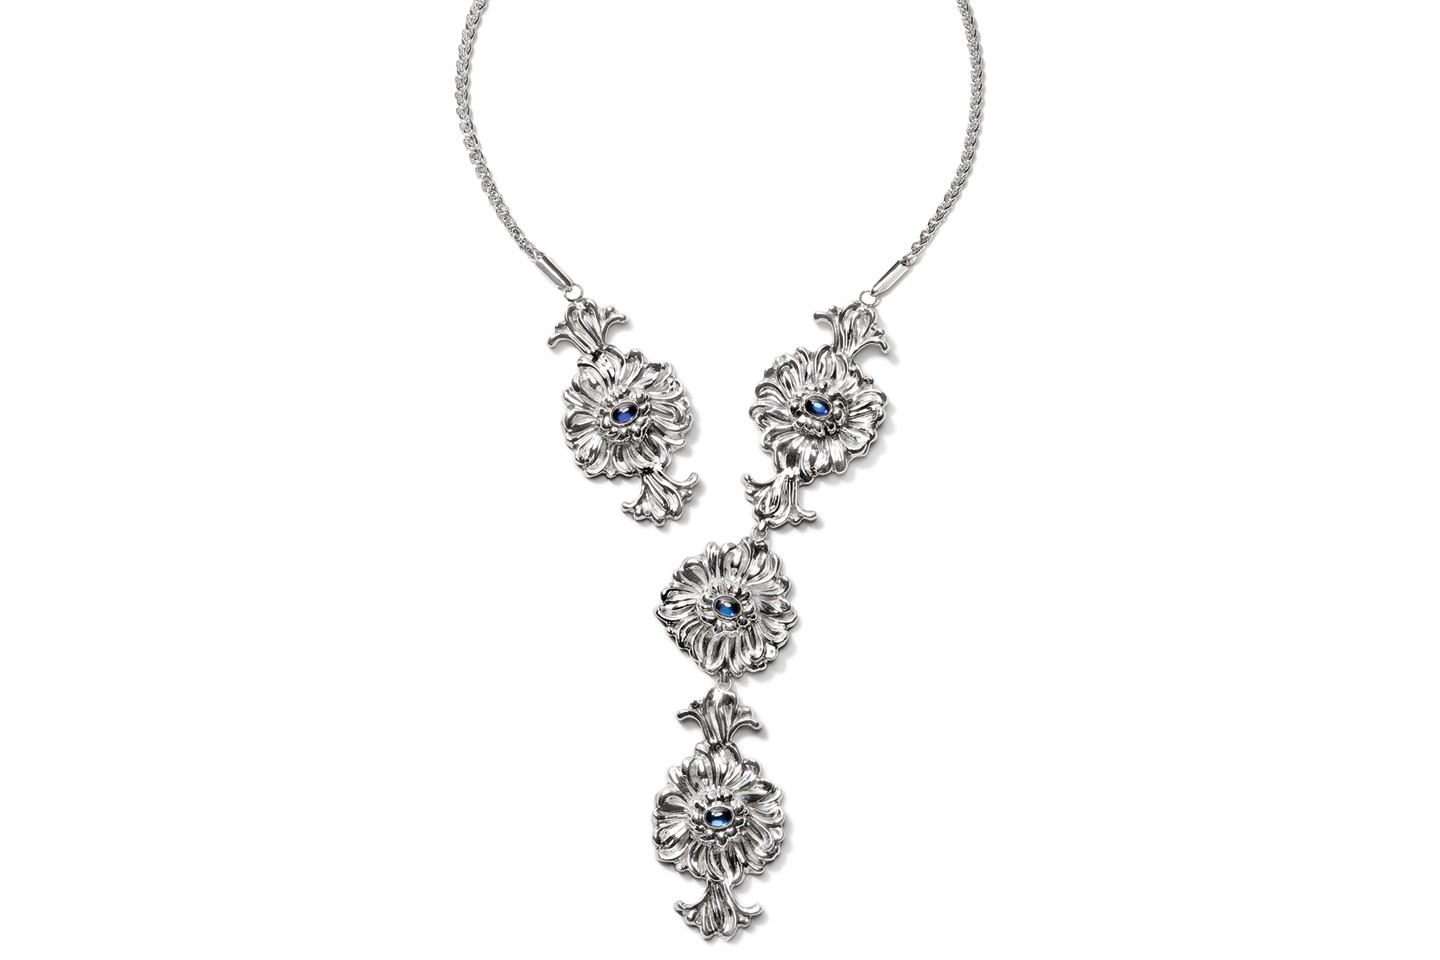 Sterling silver Chrysanthemum Necklace with Sapphires designed by Michael Galmer. Photography by Zephyr Ivanisi and Oliver Ivanisi of [ZeO] Productions.